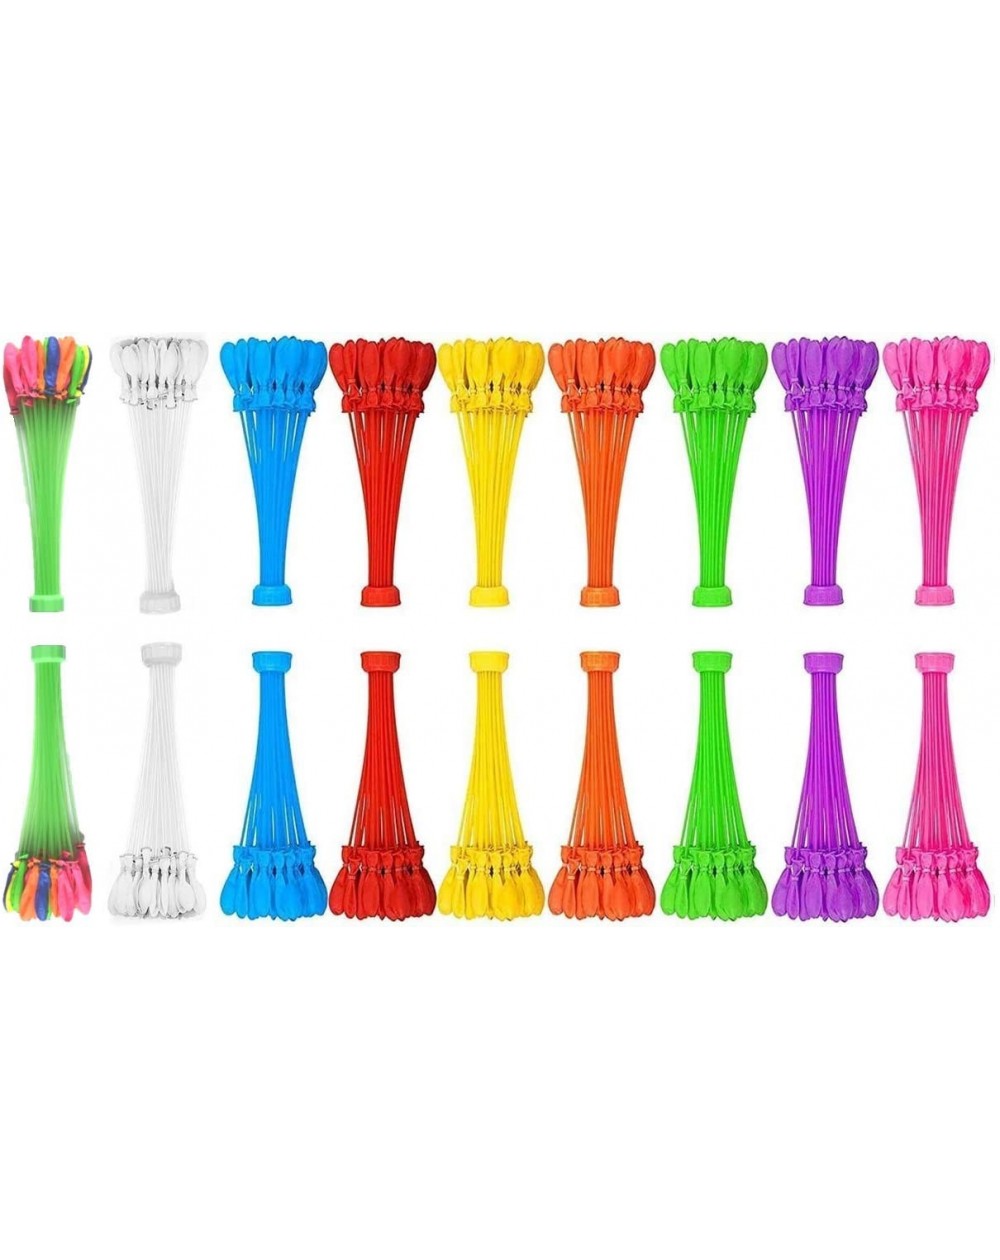 Balloons Water Balloons Quick Fill and Self Seal Available in Single or Multi color Bunches (6 Bunch (222 Balloons)- Green) -...